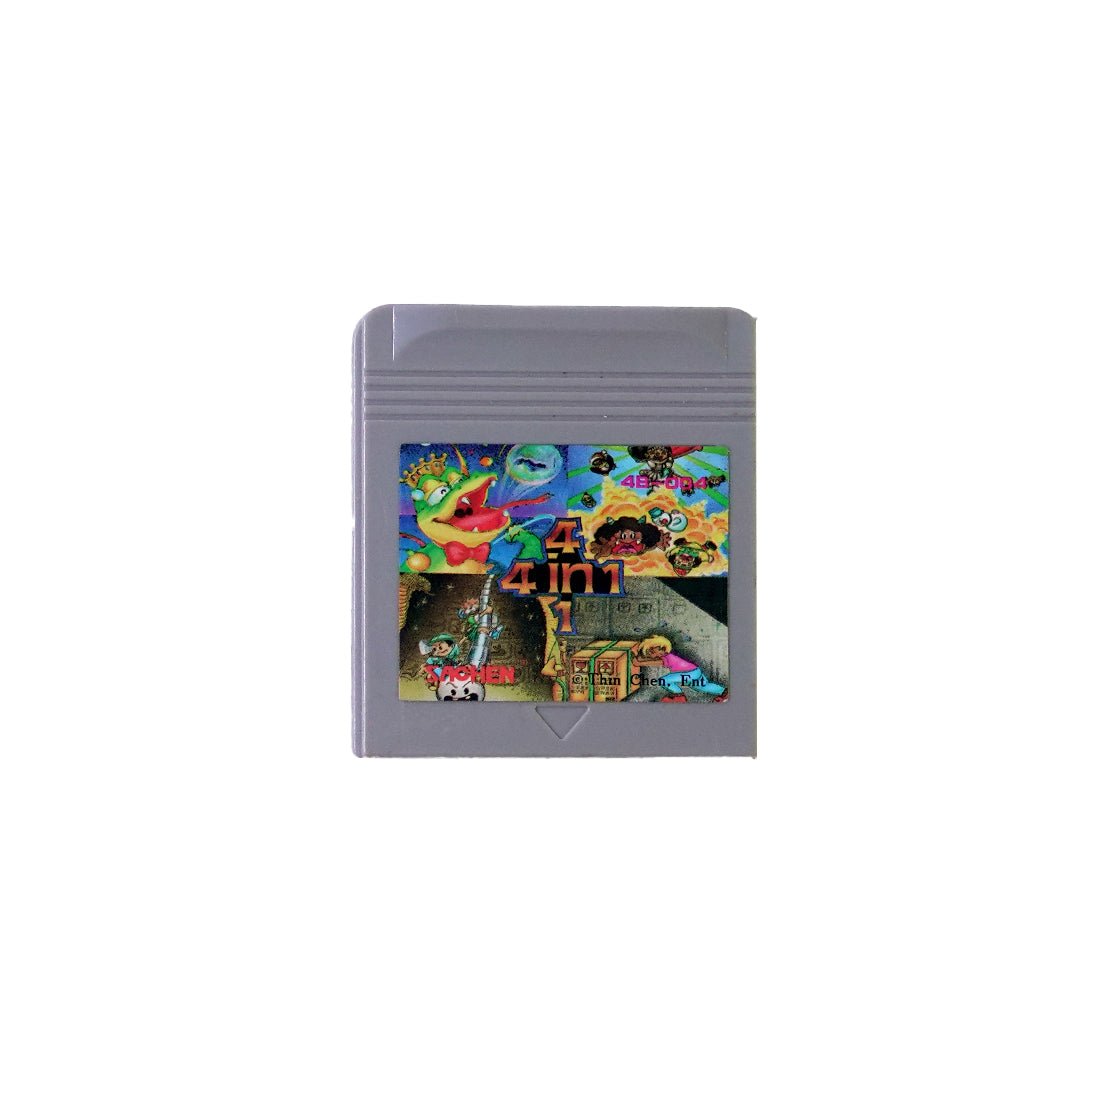 (Pre-Owned) 4 in 1 Game - Gameboy Classic - ريترو - Store 974 | ستور ٩٧٤